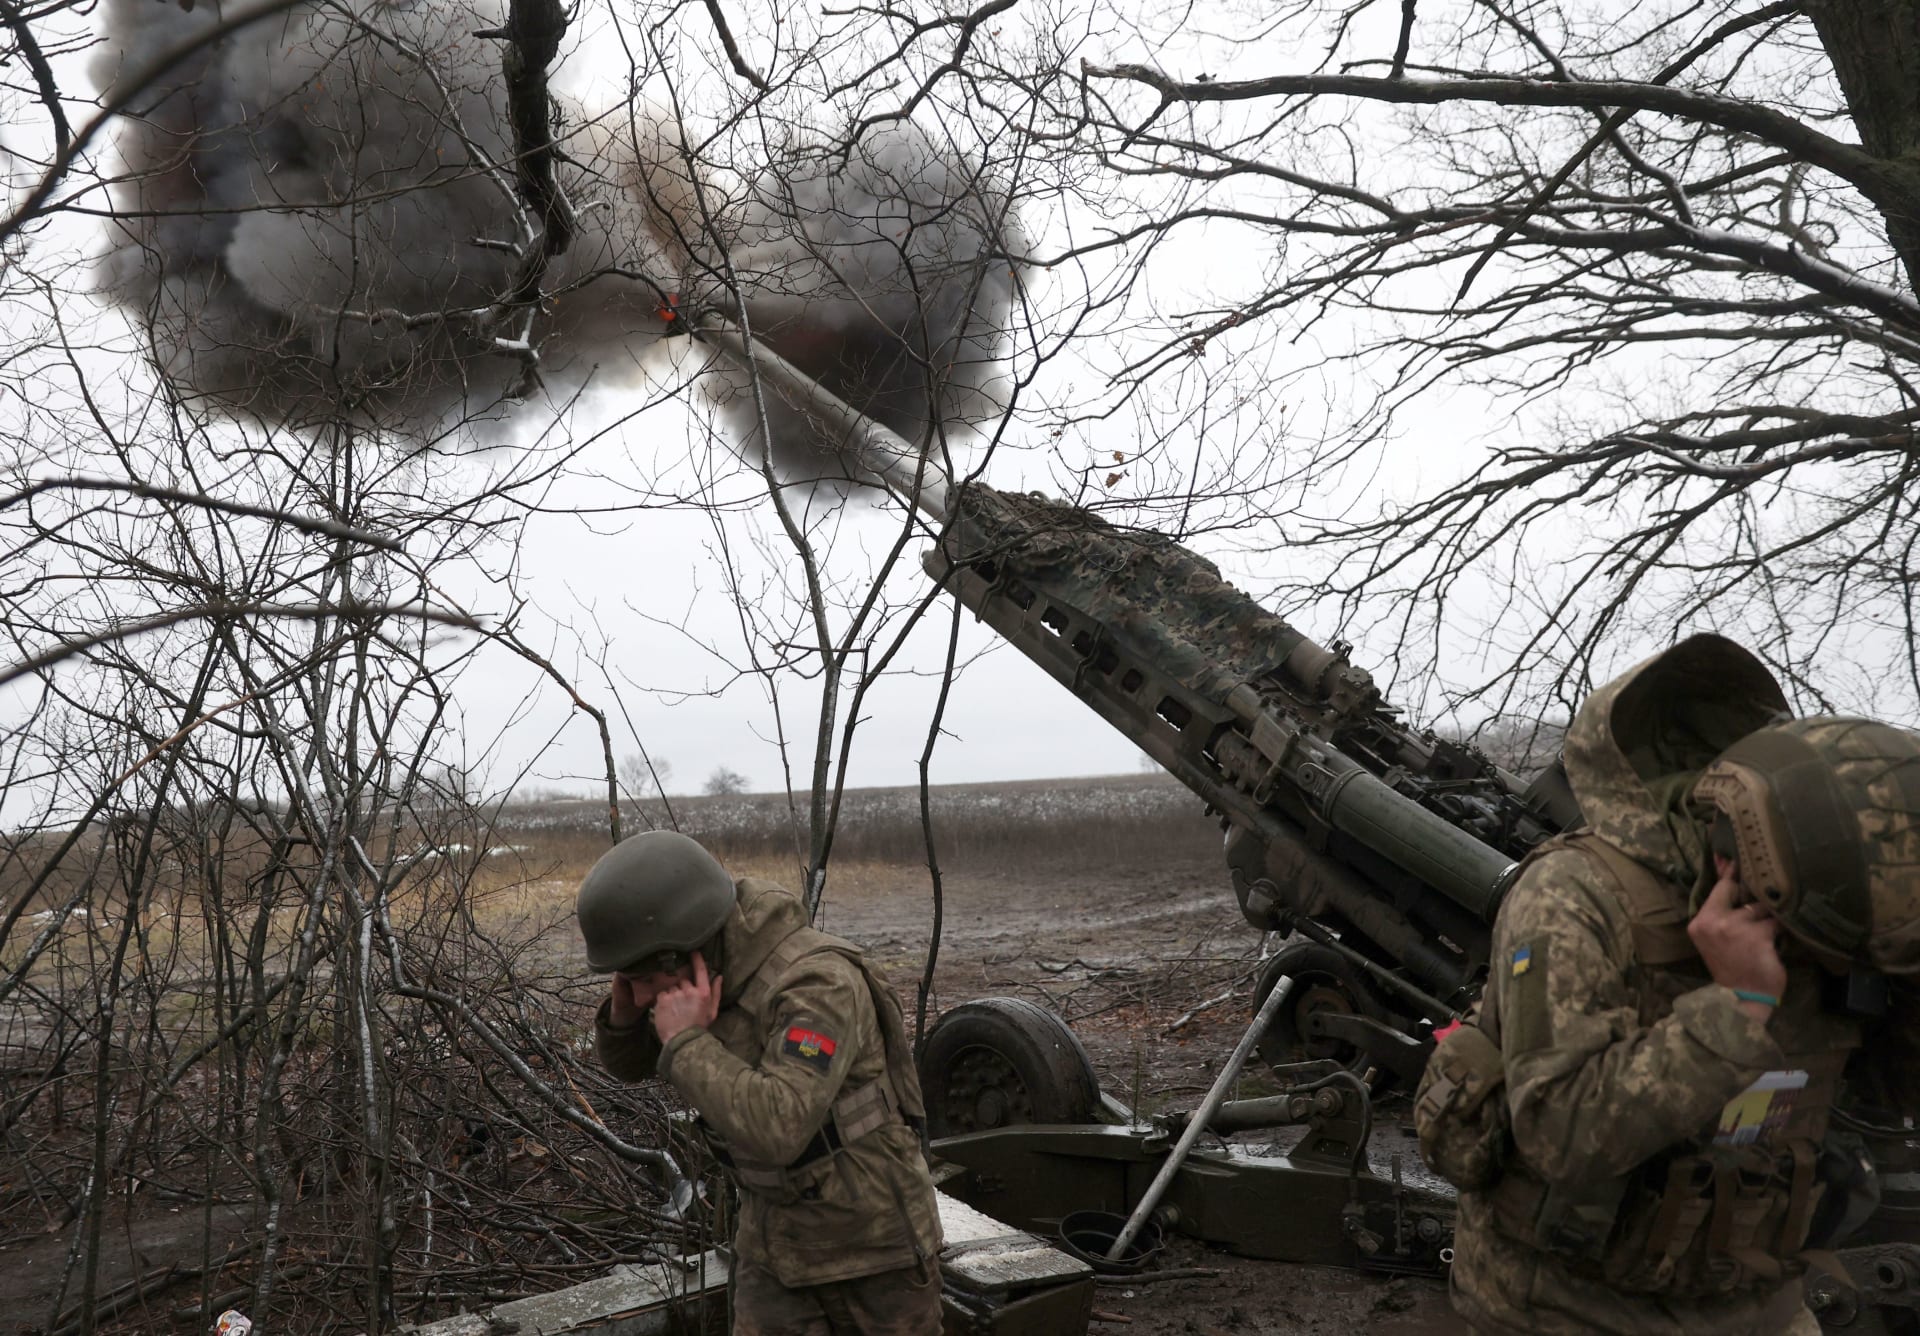 How did Ukraine become a laboratory for Western weapons and innovations on the battlefield?